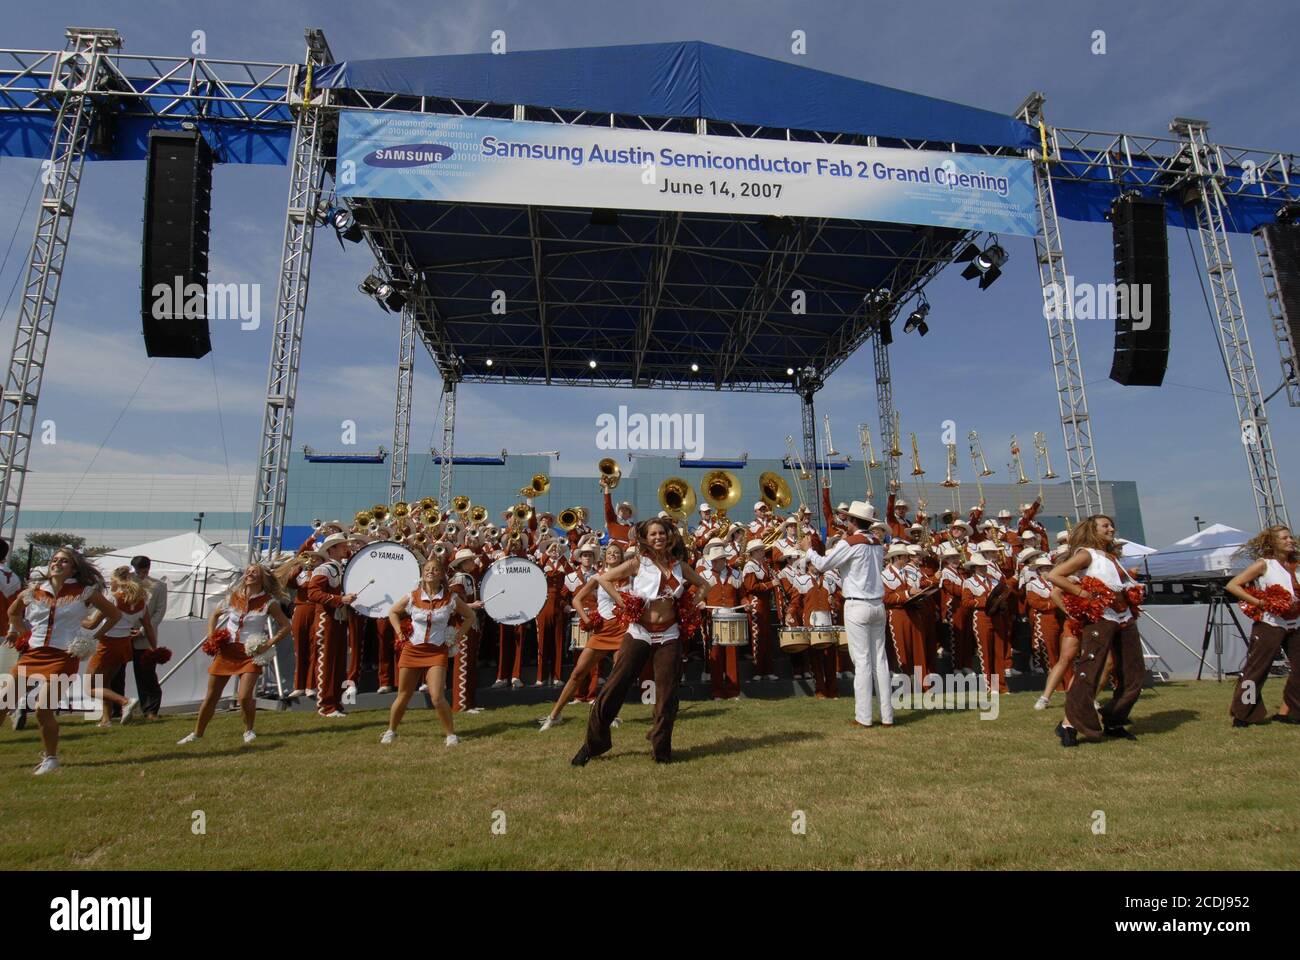 Austin,TX June 14, 2007: The University of Texas Longhorn band, cheerleaders and dancers perform at grand opening ceremonies at Samsung Austin Semiconductor (SAS) for 'Fab 2' manufacturing facility showcasing the Korean chip manufacturer's multi-billion-dollar U.S. investment. ©Bob Daemmrich Stock Photo